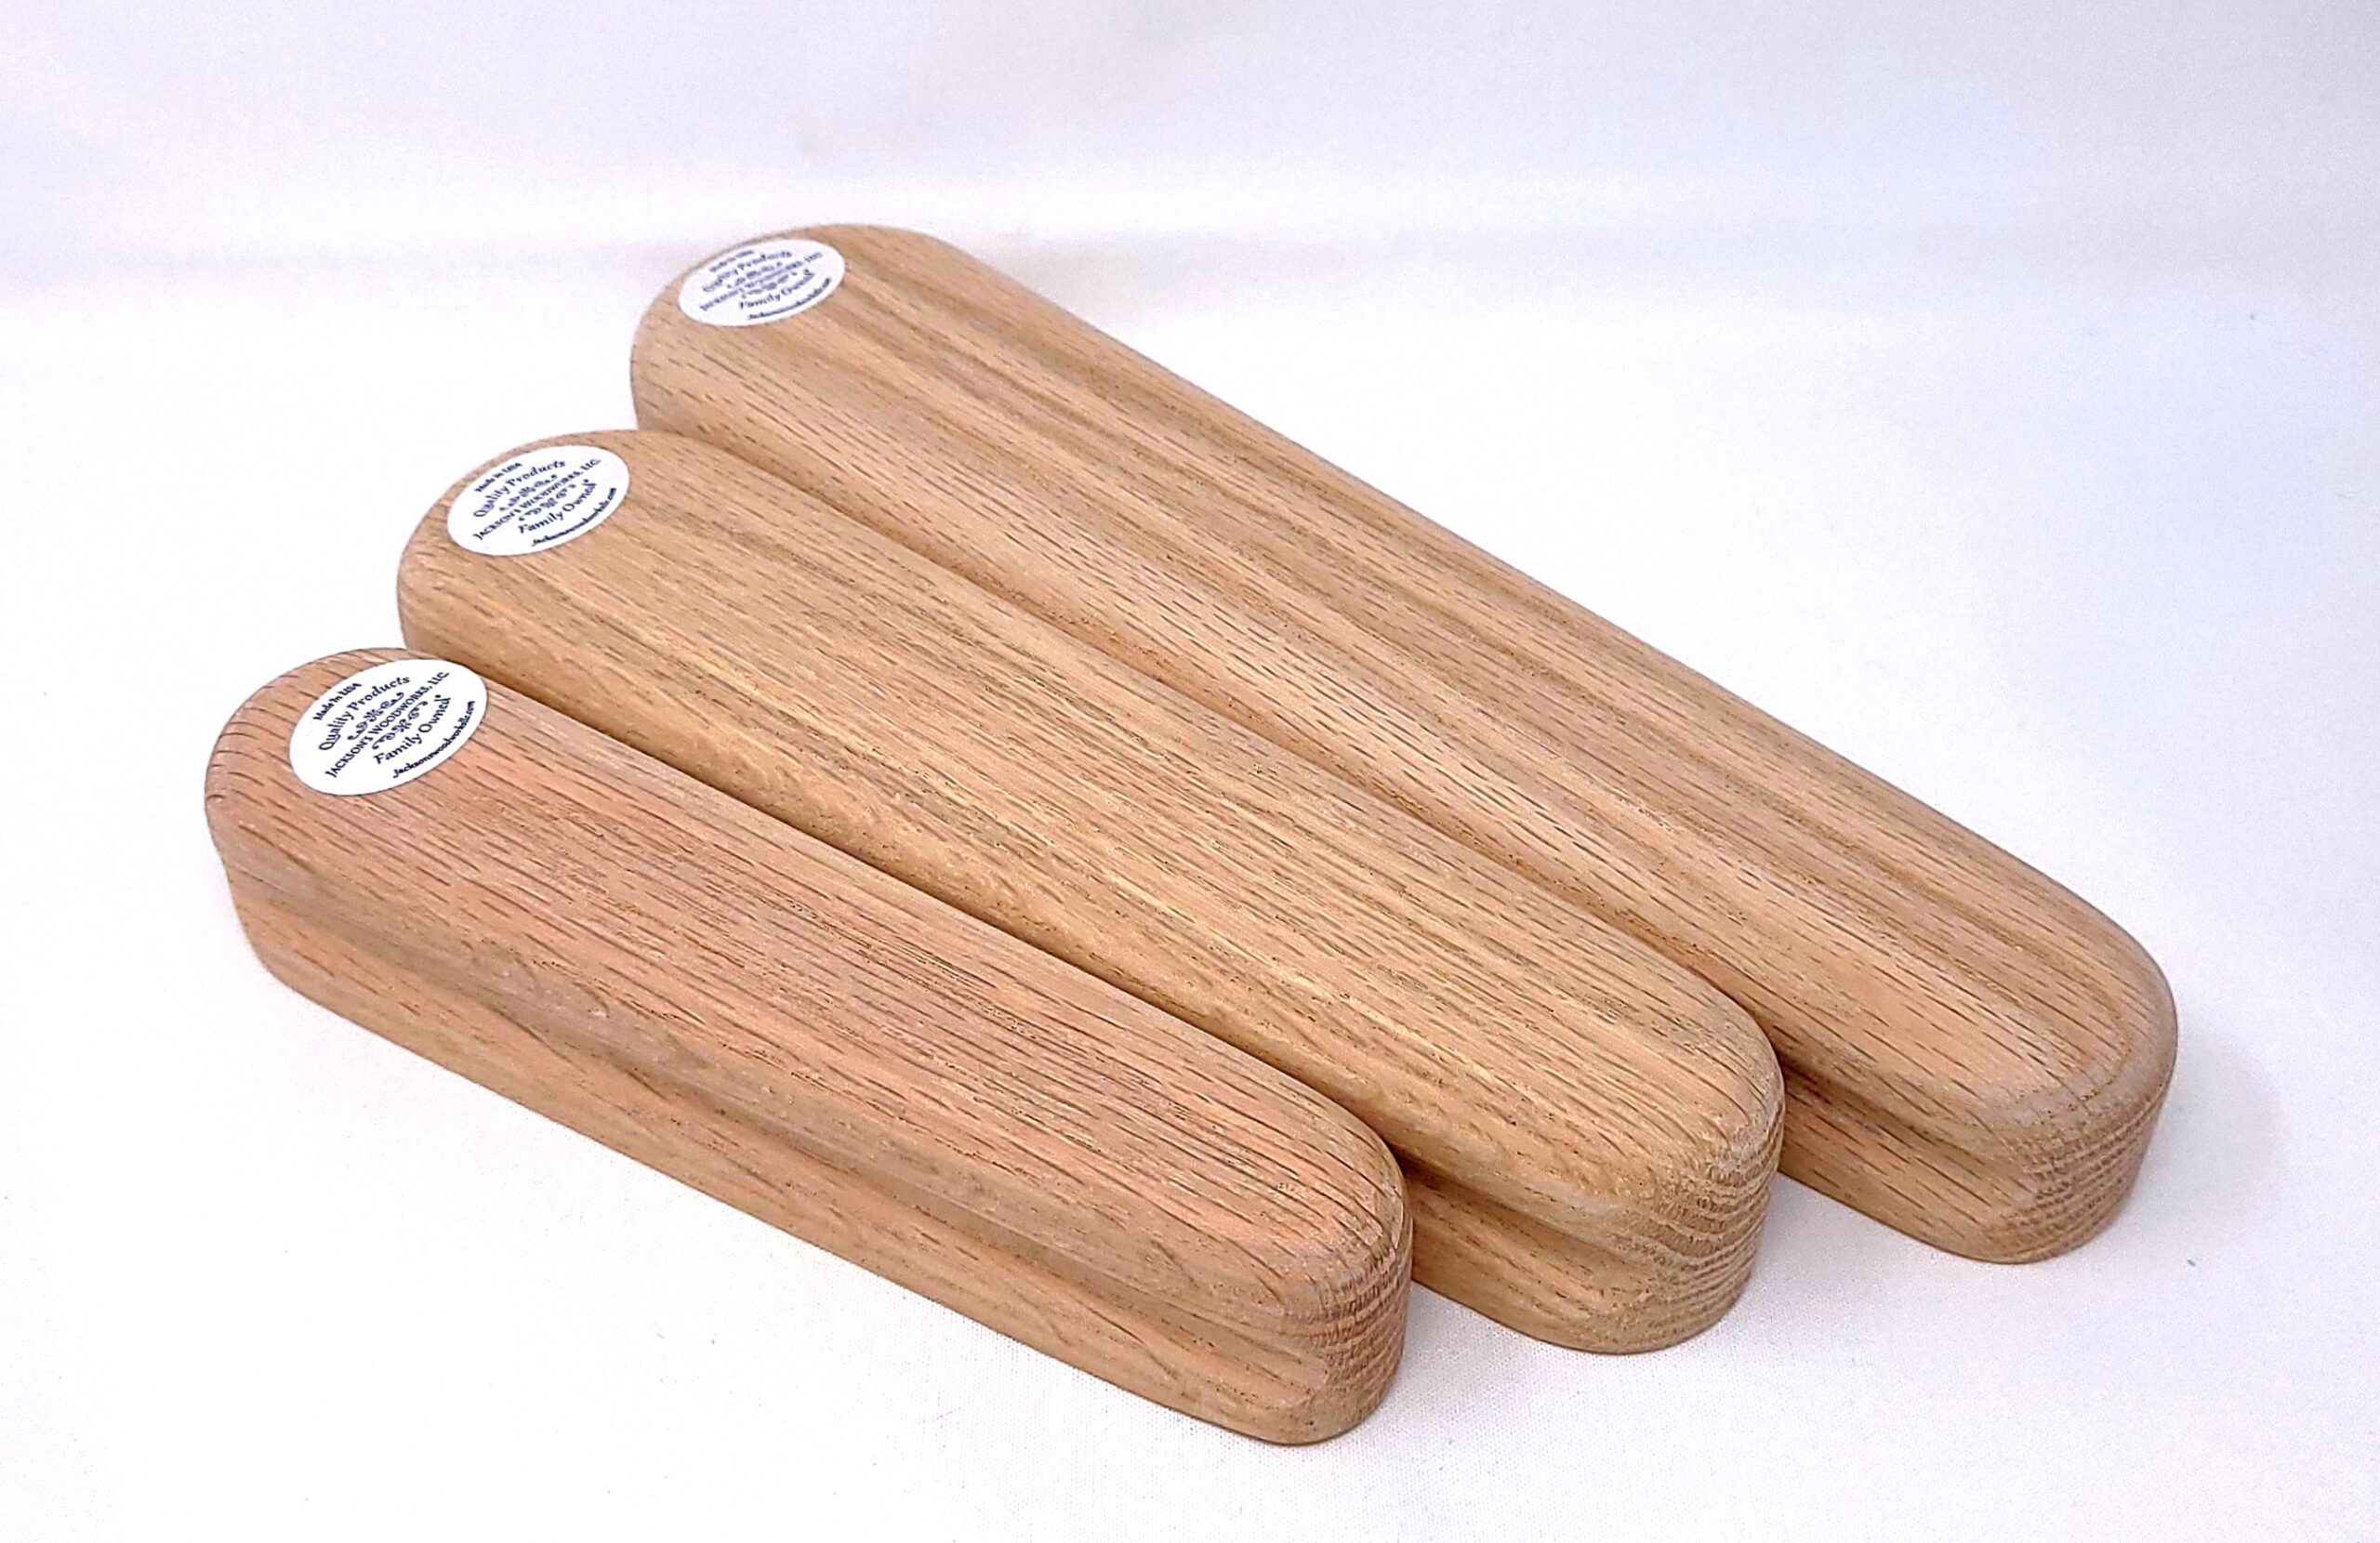 8 Small Tailor's Clapper, Jackson's Woodworks #JW01003